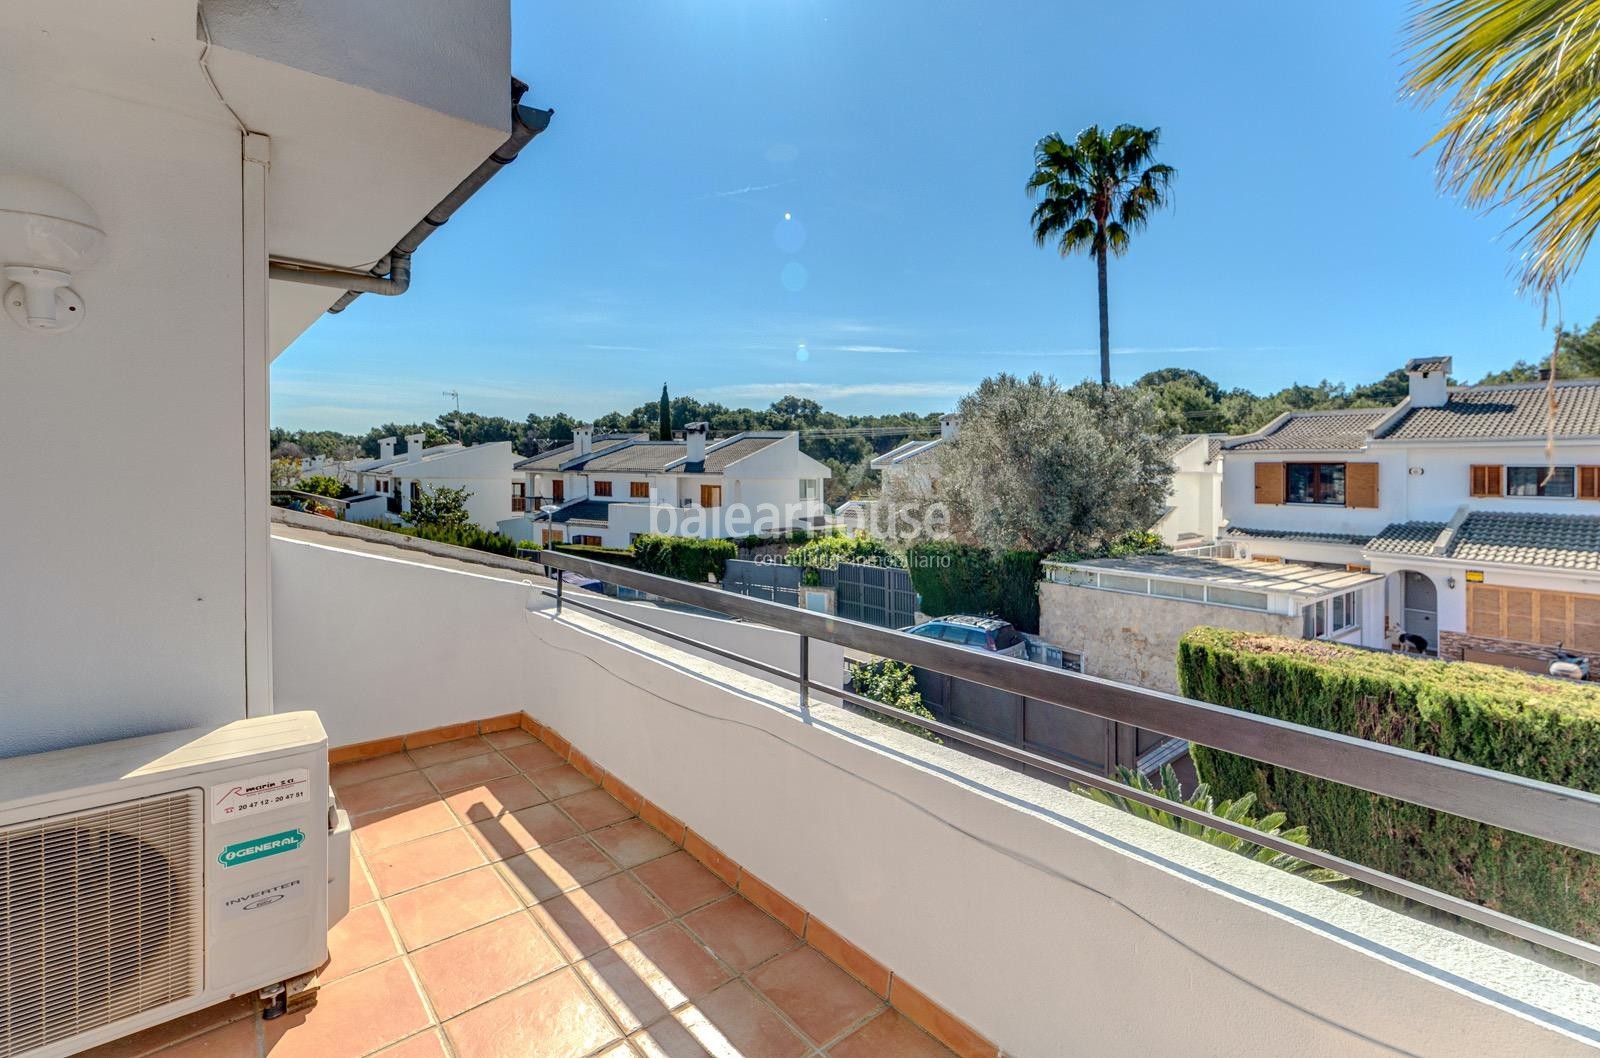 Excellent south facing house with terraces and garden in the green area of Sa Teulera in Palma.